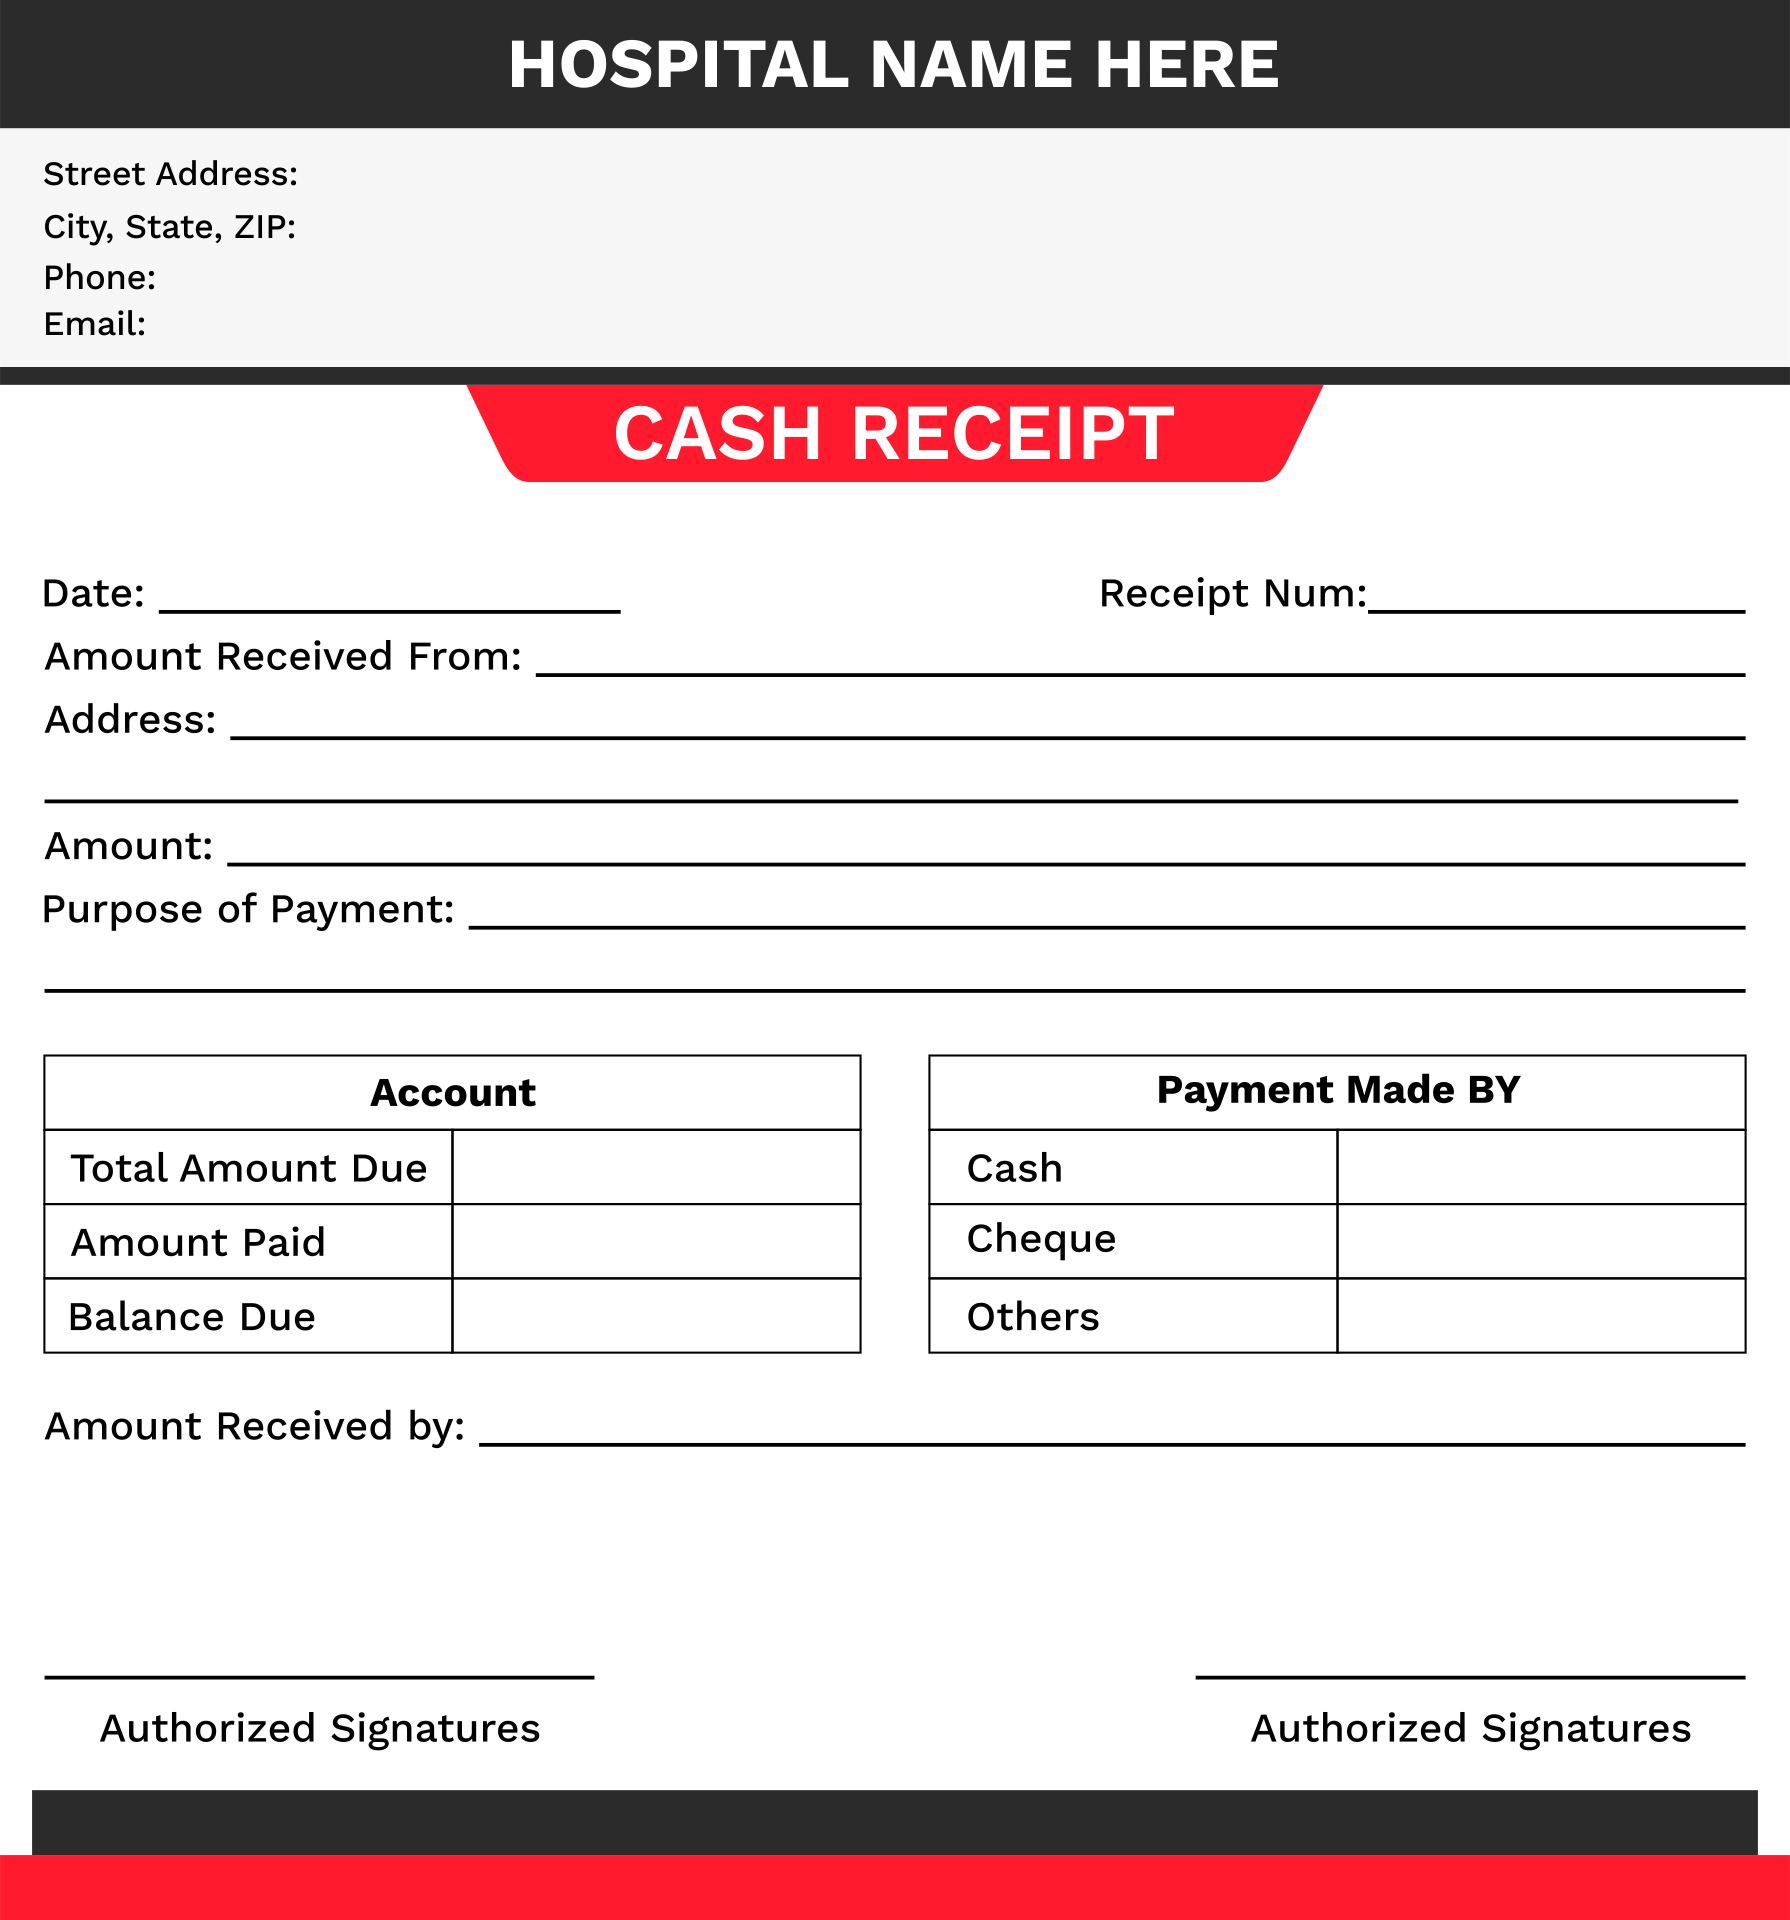 6 Best Images of Printable Medical Receipts - Medical Payment Receipt Template, Medical Patient ...